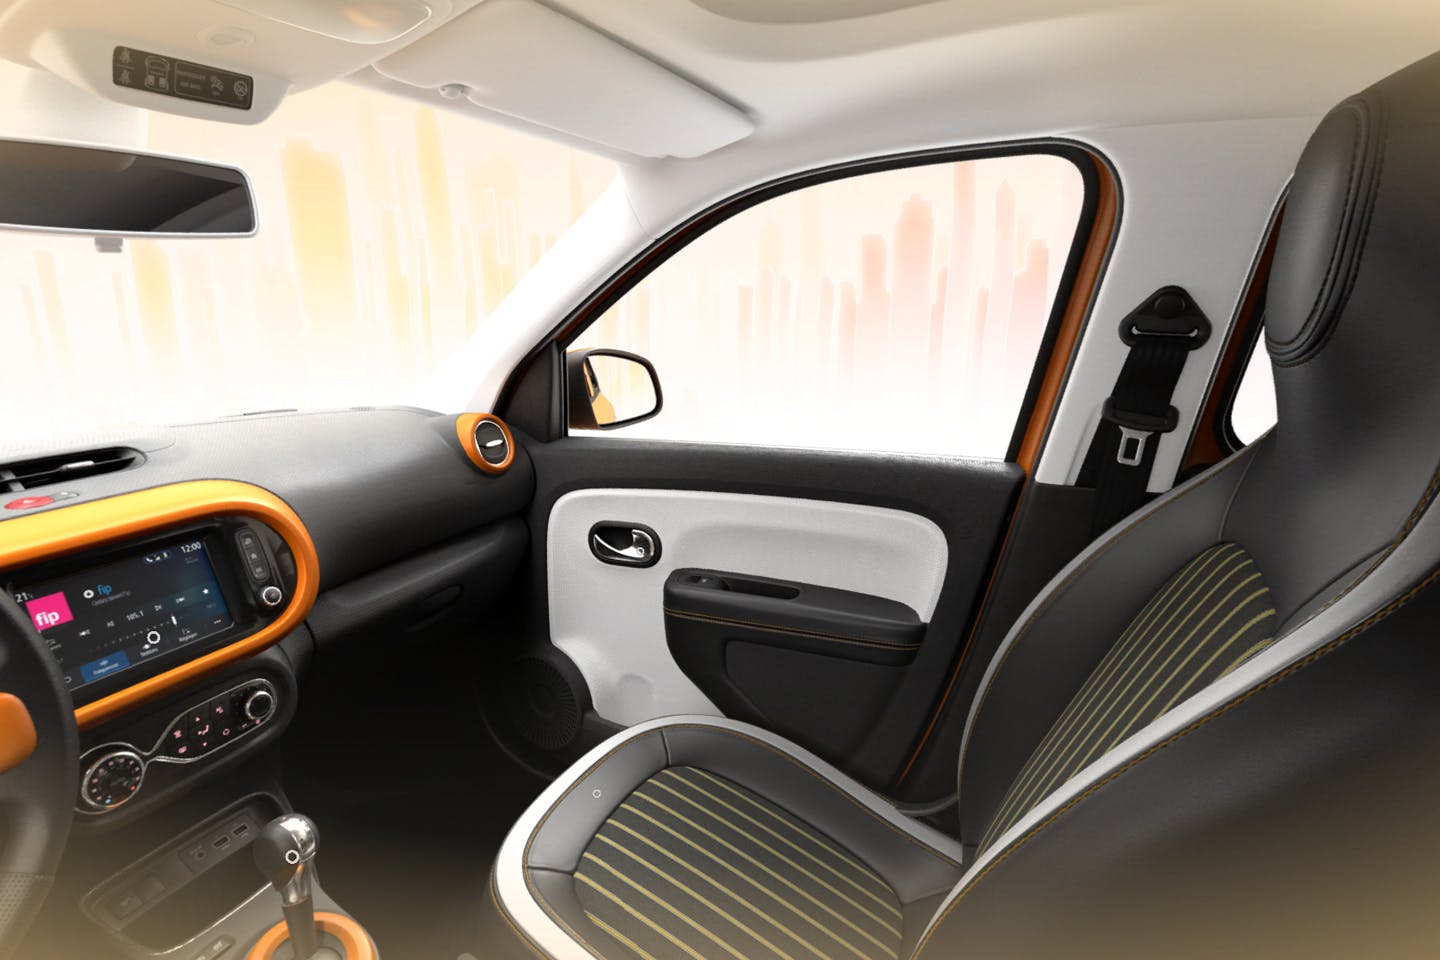 Inside the newest Renault Twingo.